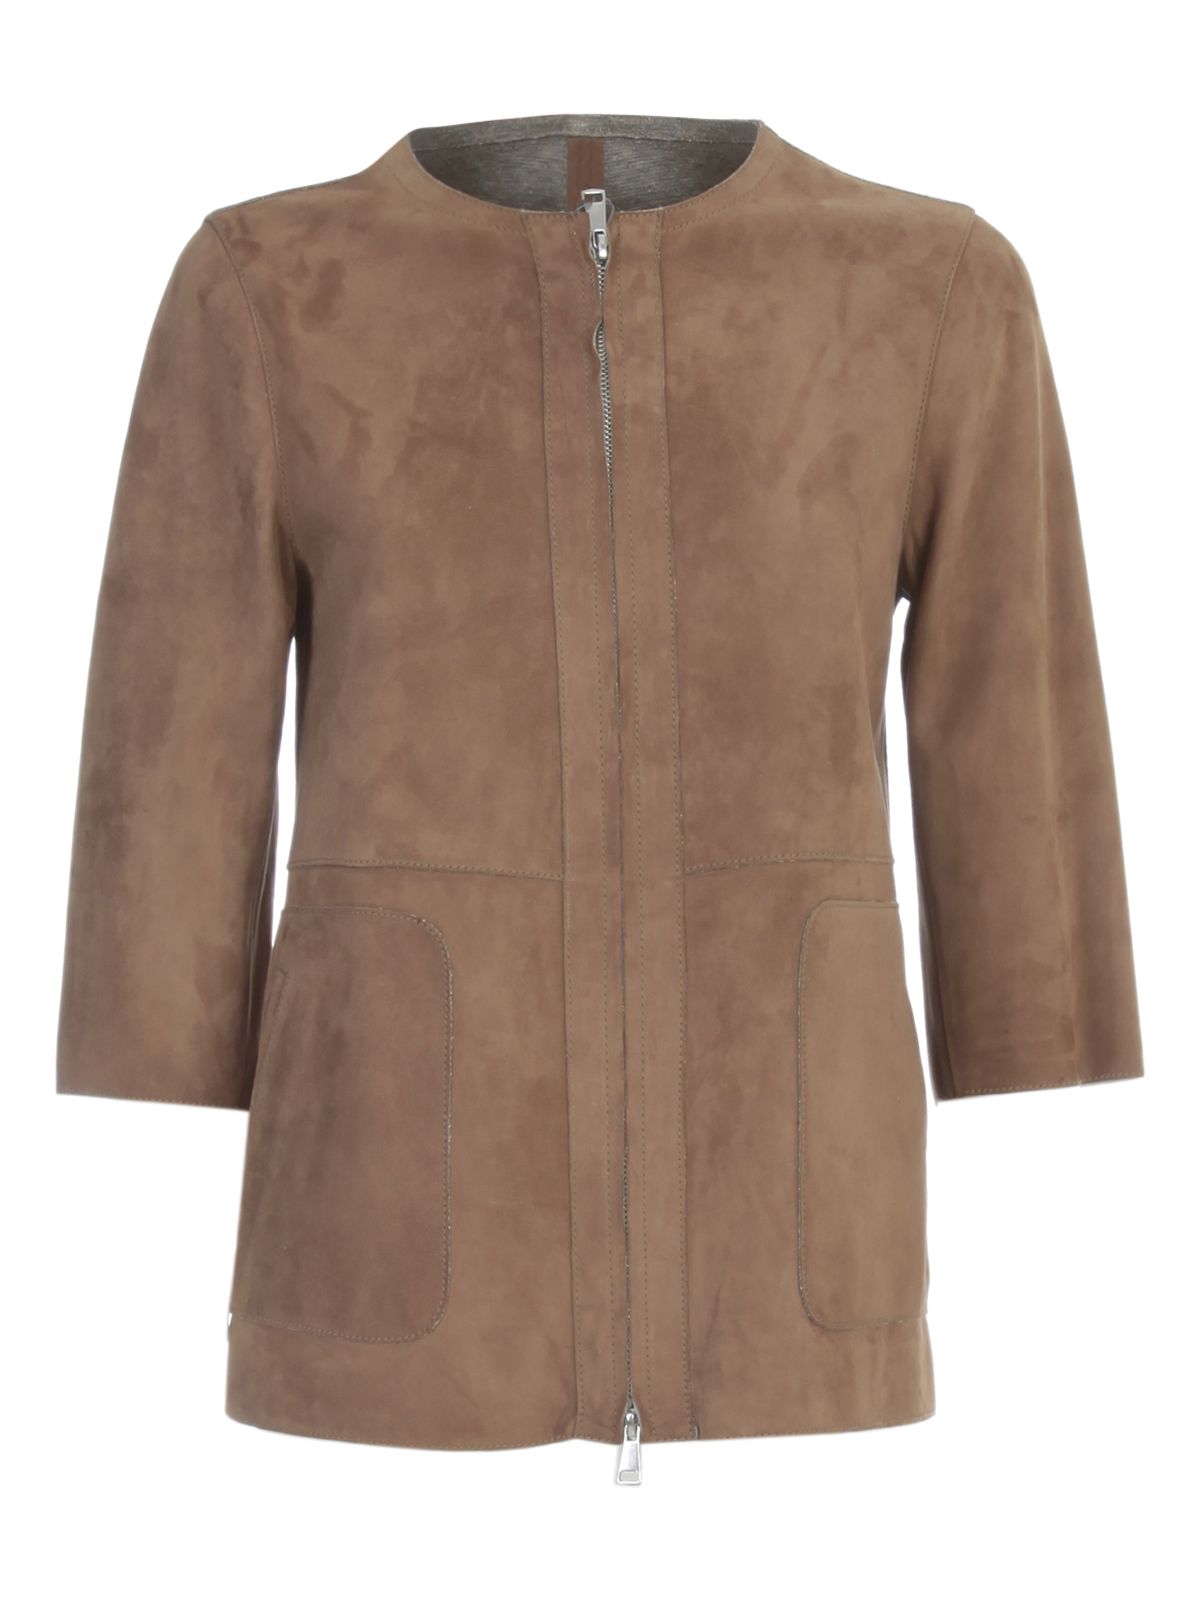 The Jackie Leathers Brown Bomber Jacket